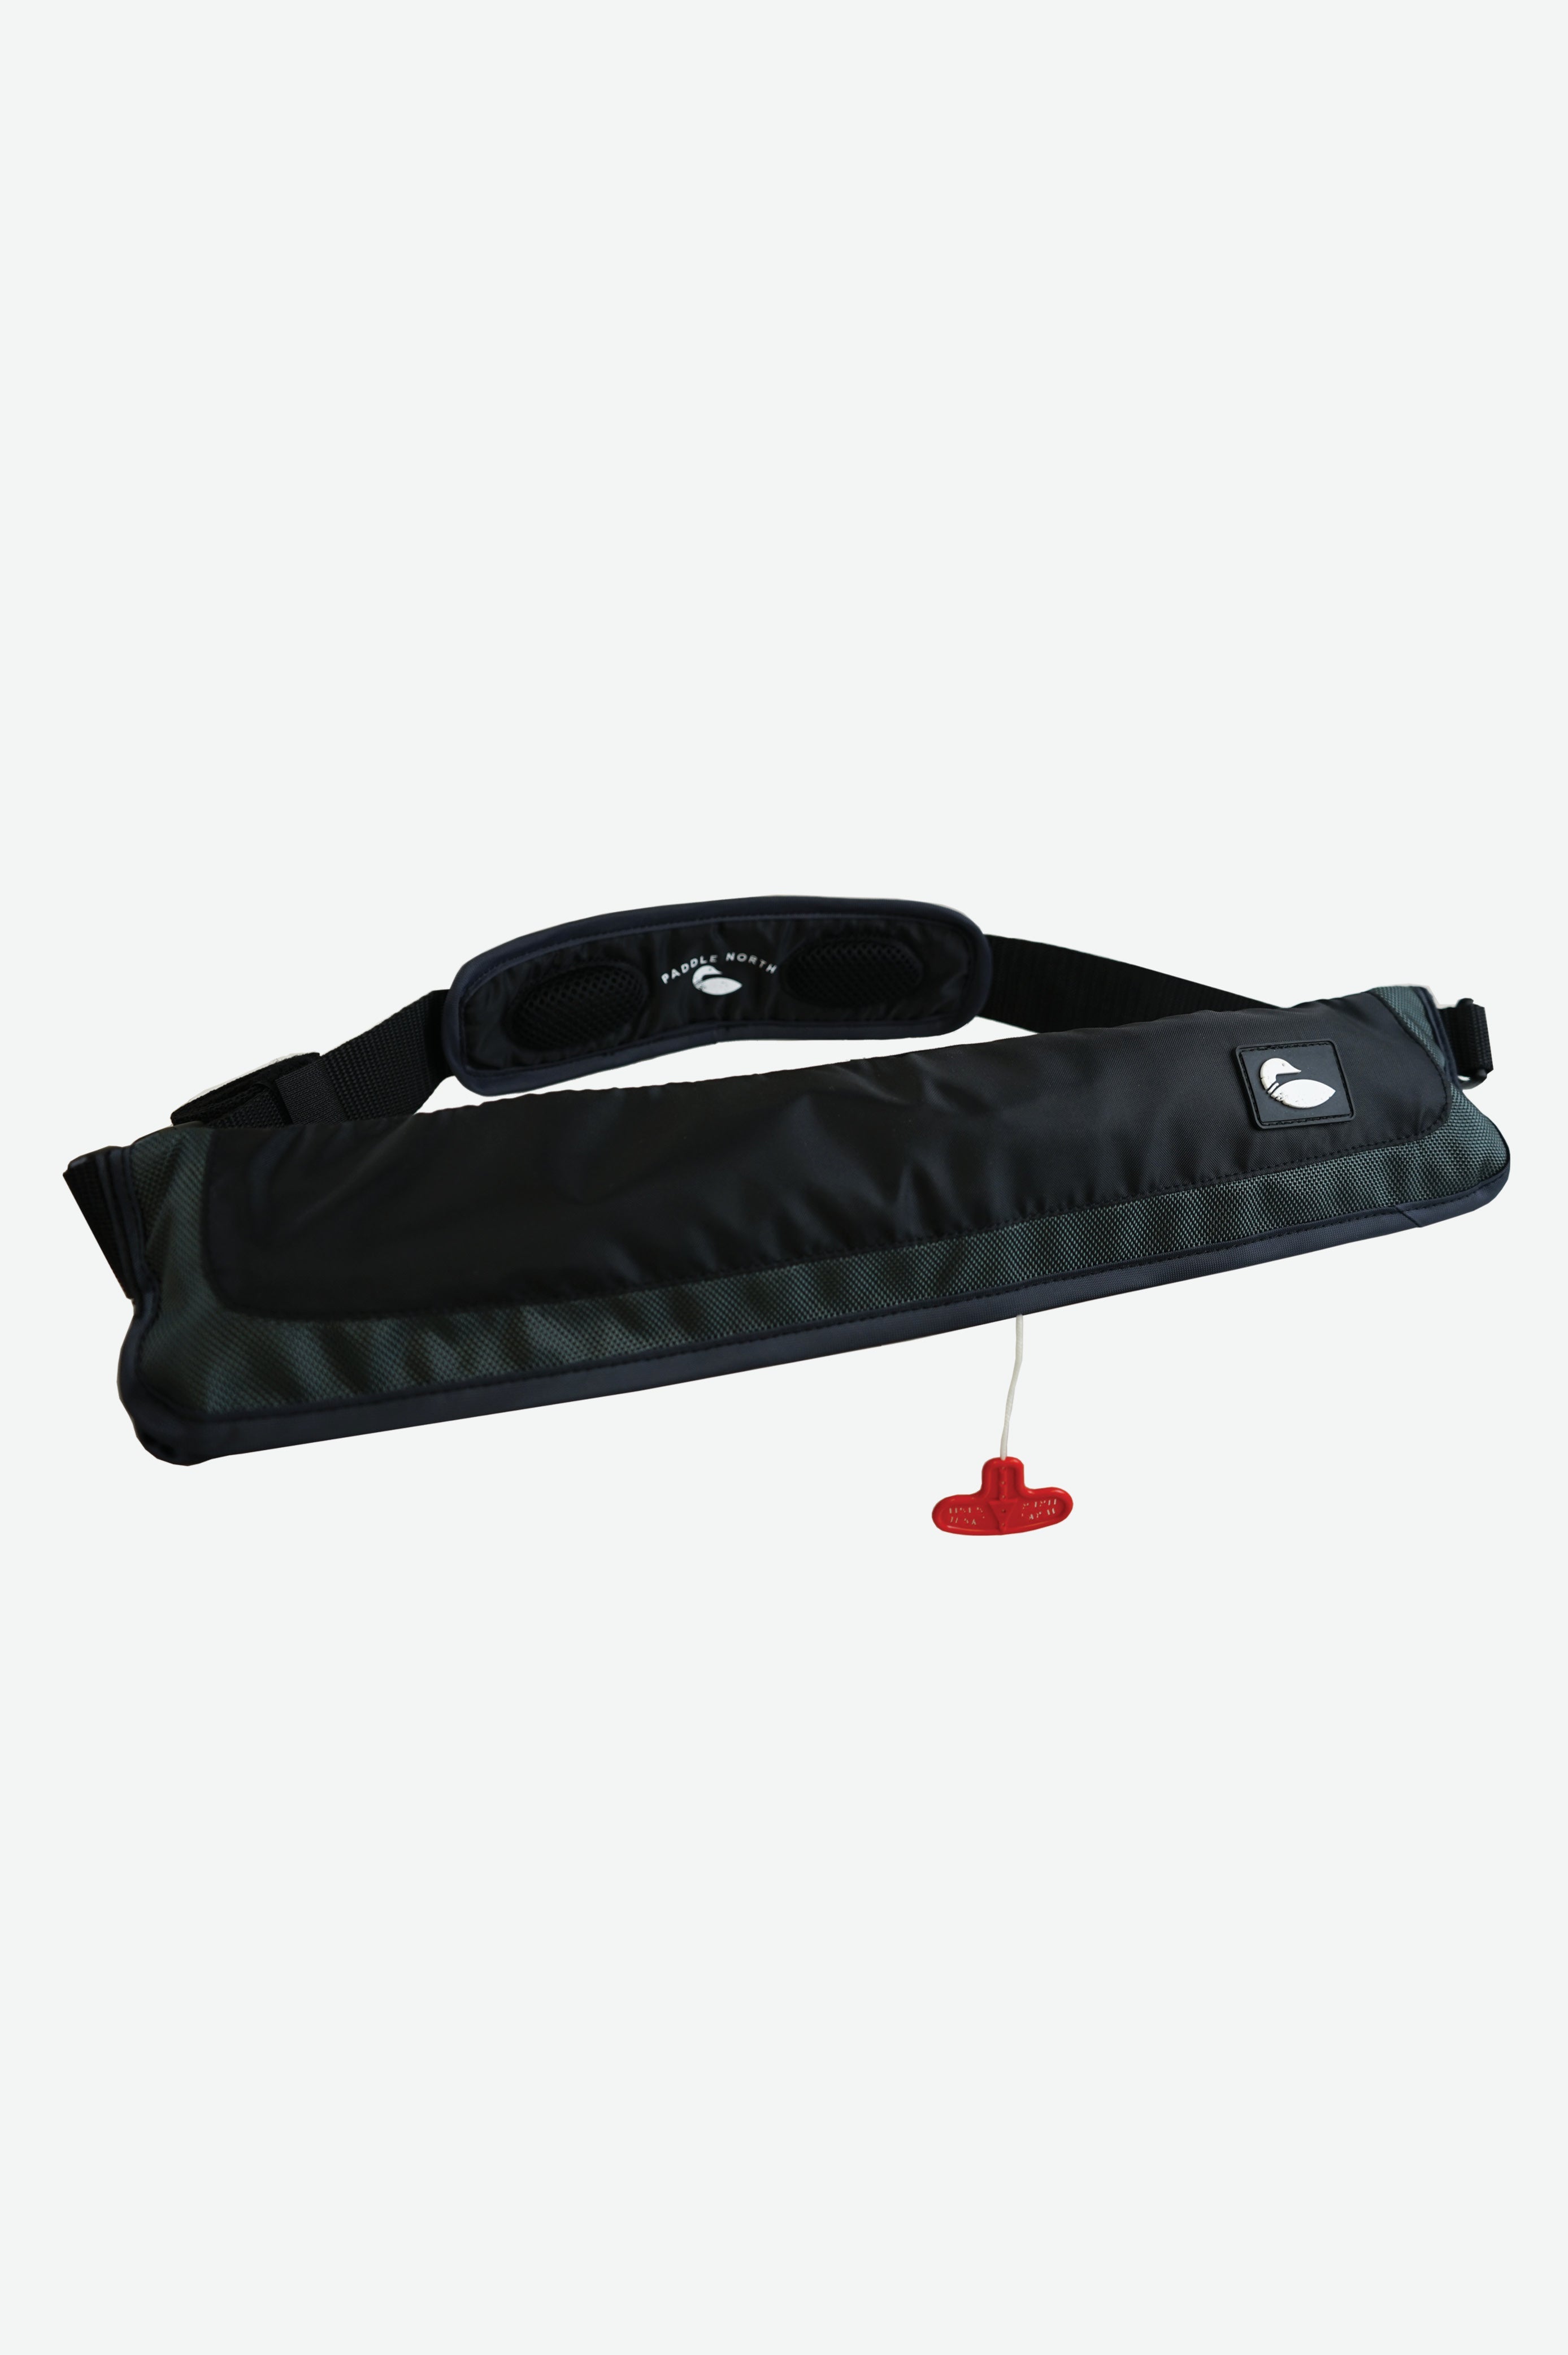 Inflatable Belt Pack (PFD) - Display